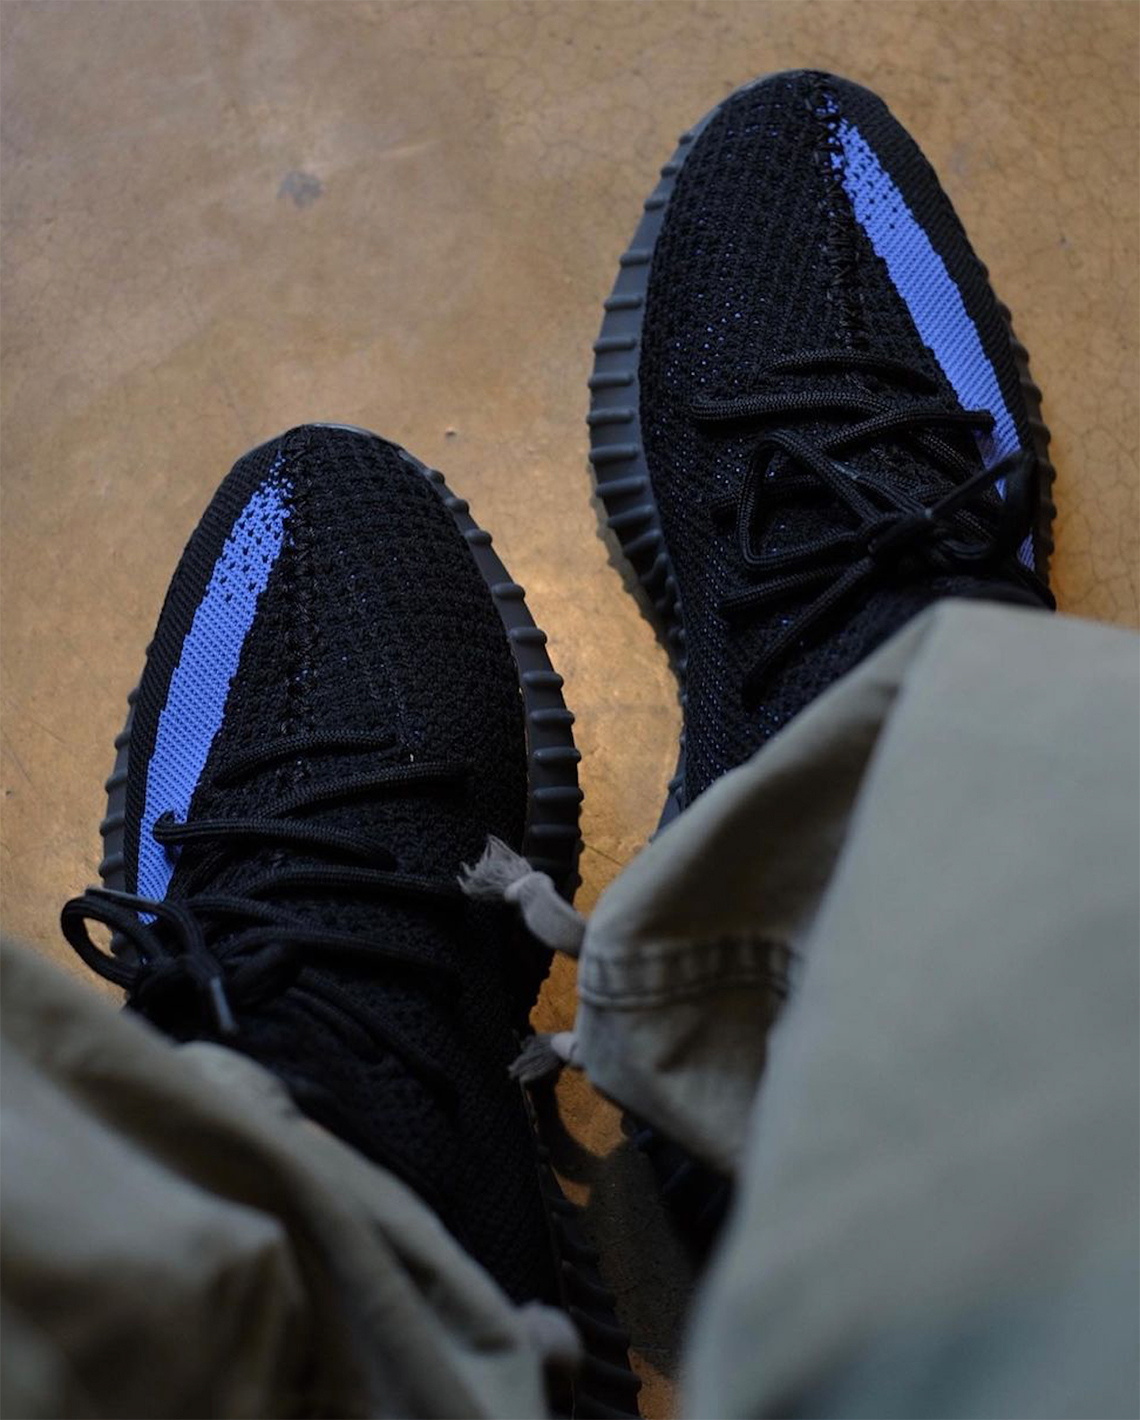 ADIDAS X YEEZY COLLAB OFFICIAL THREAD *NO LC's PLEASE* | Page 4288 |  NikeTalk